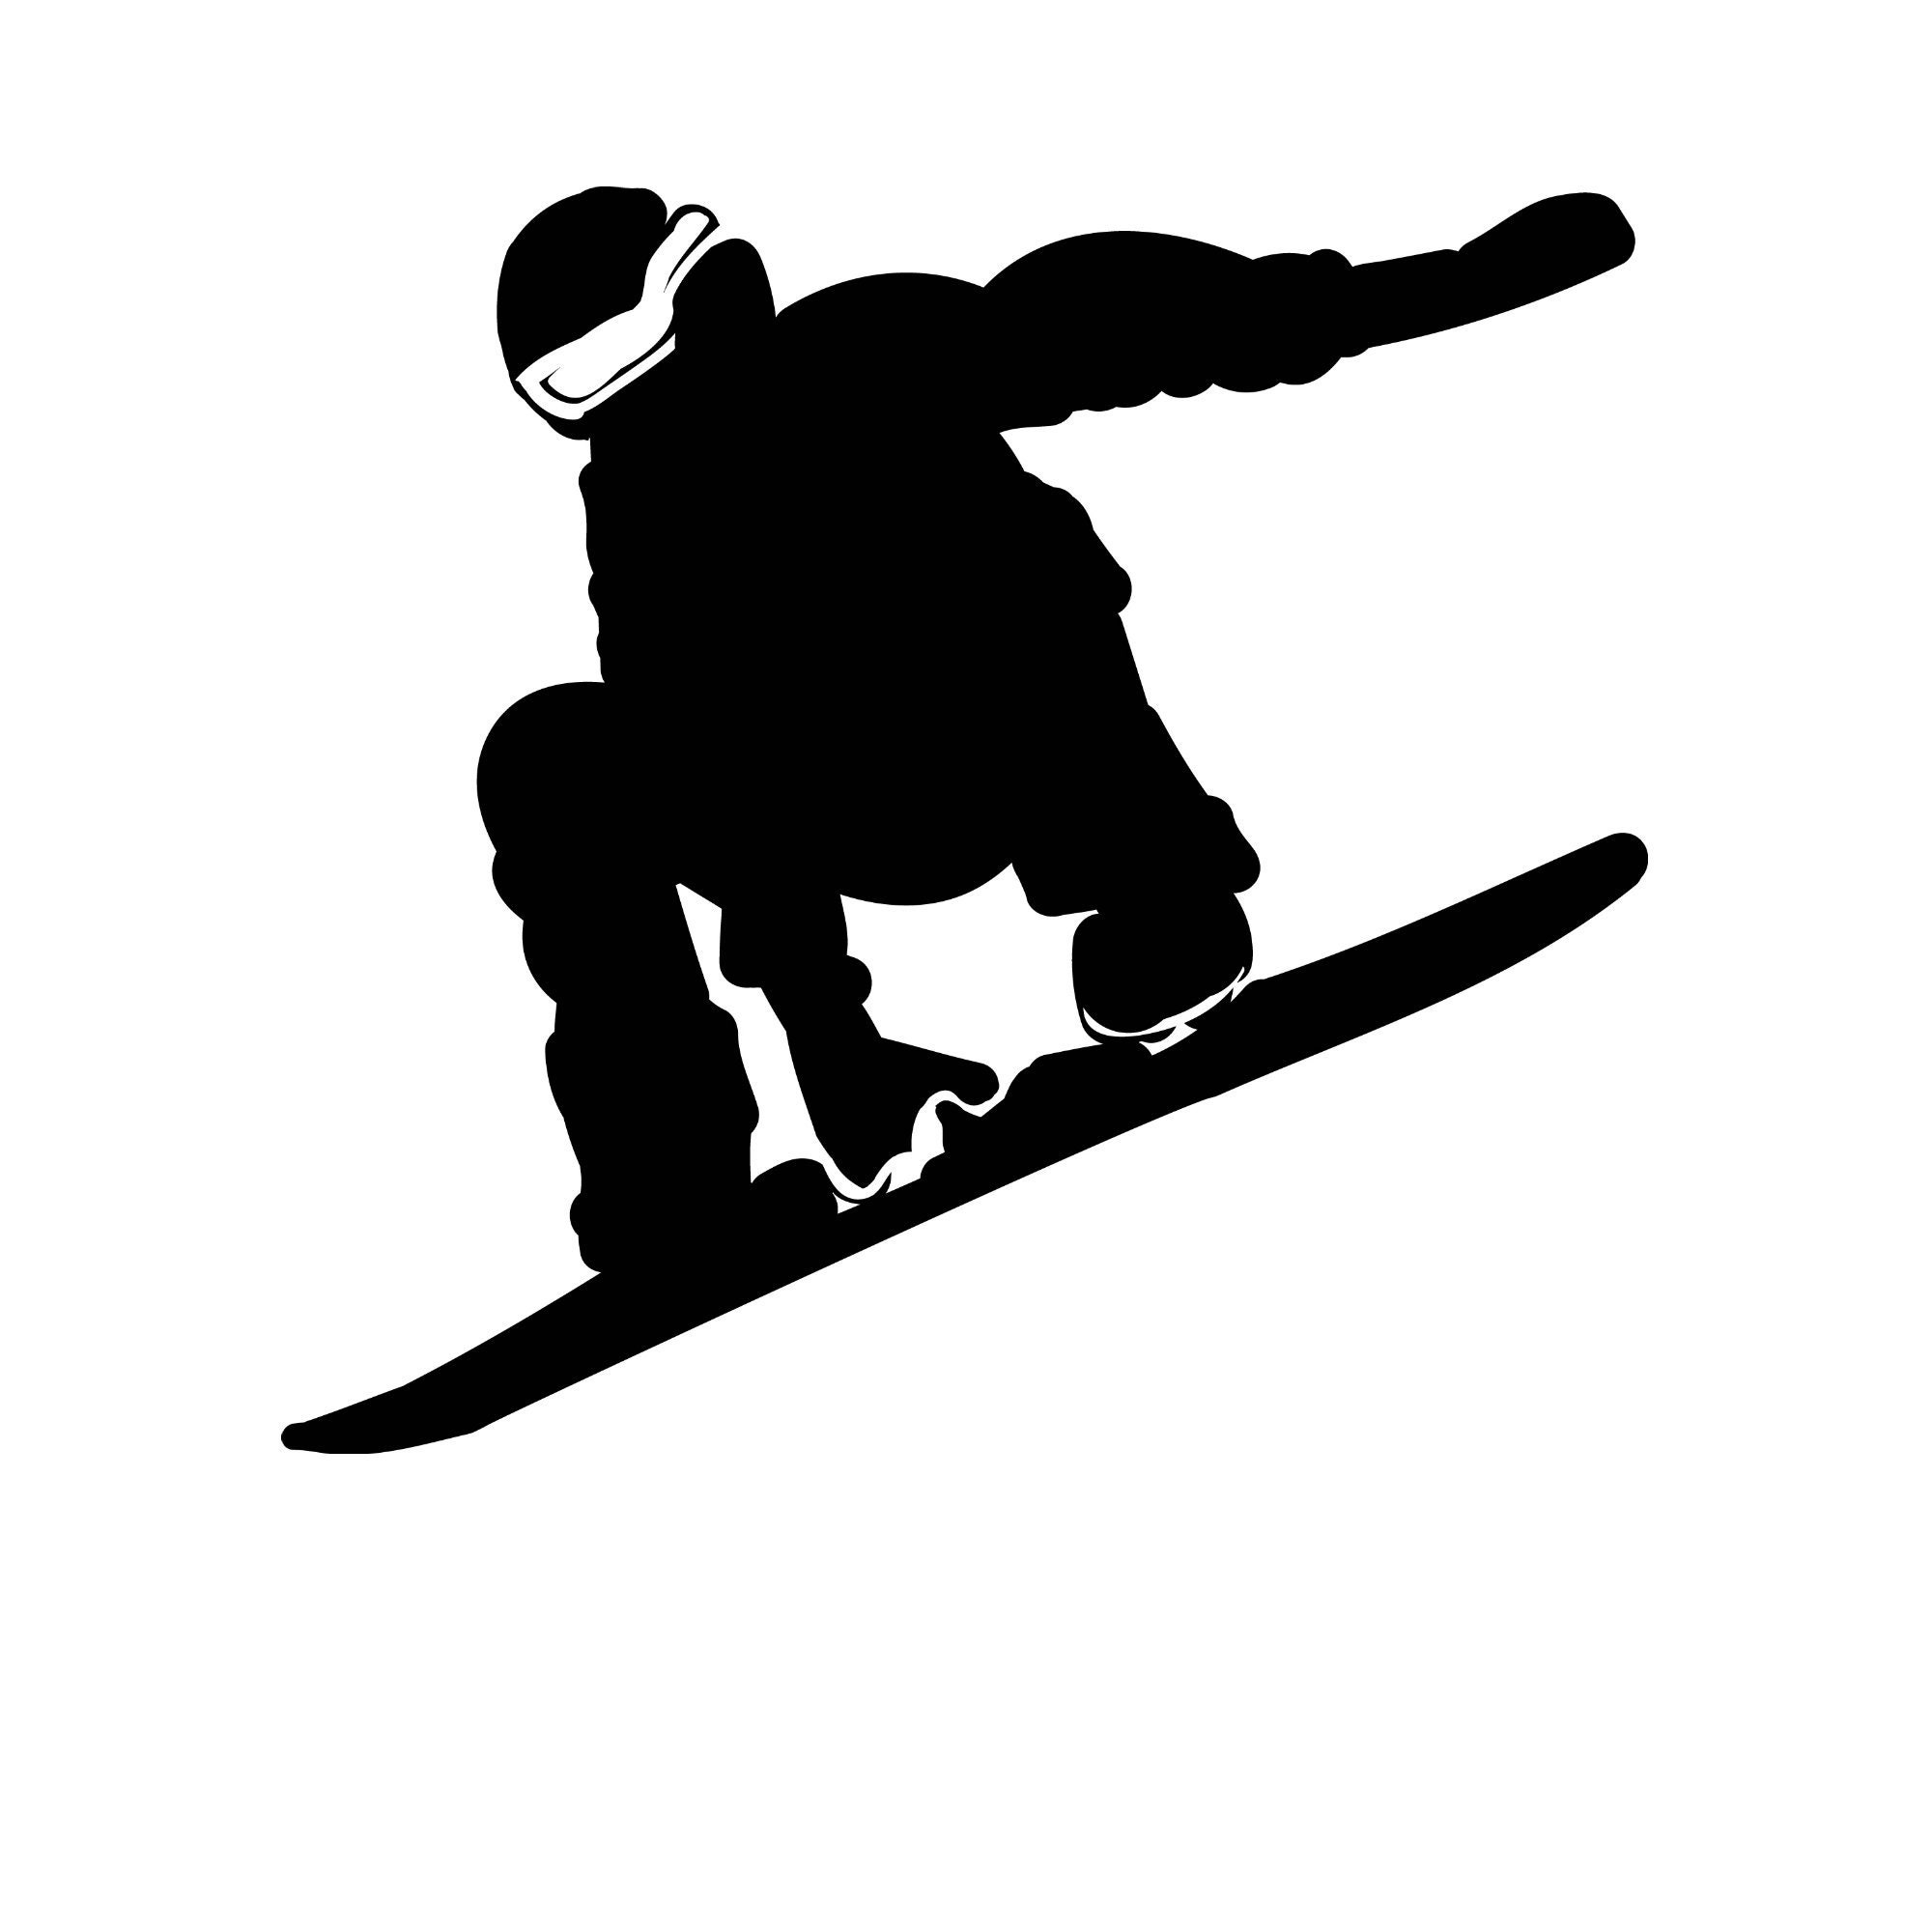 Download Png Eps Dxf Snowboarder Instant Download Svg Jpg Digital Download Digital Prints Prints Tripod Ee